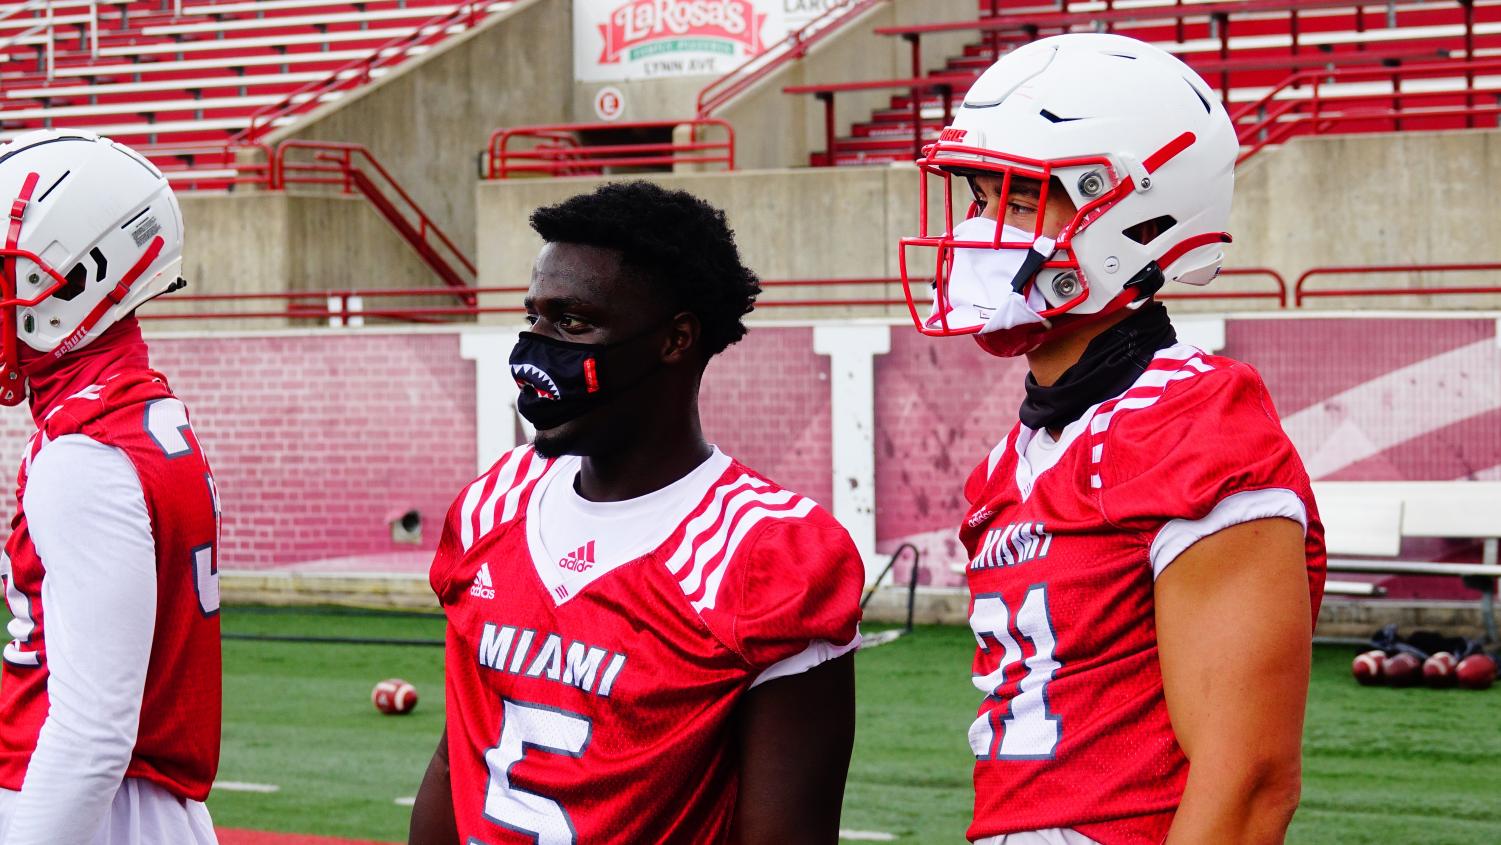 Miami football players wear masks on and off the field to mitigate the spread of COVID-19 